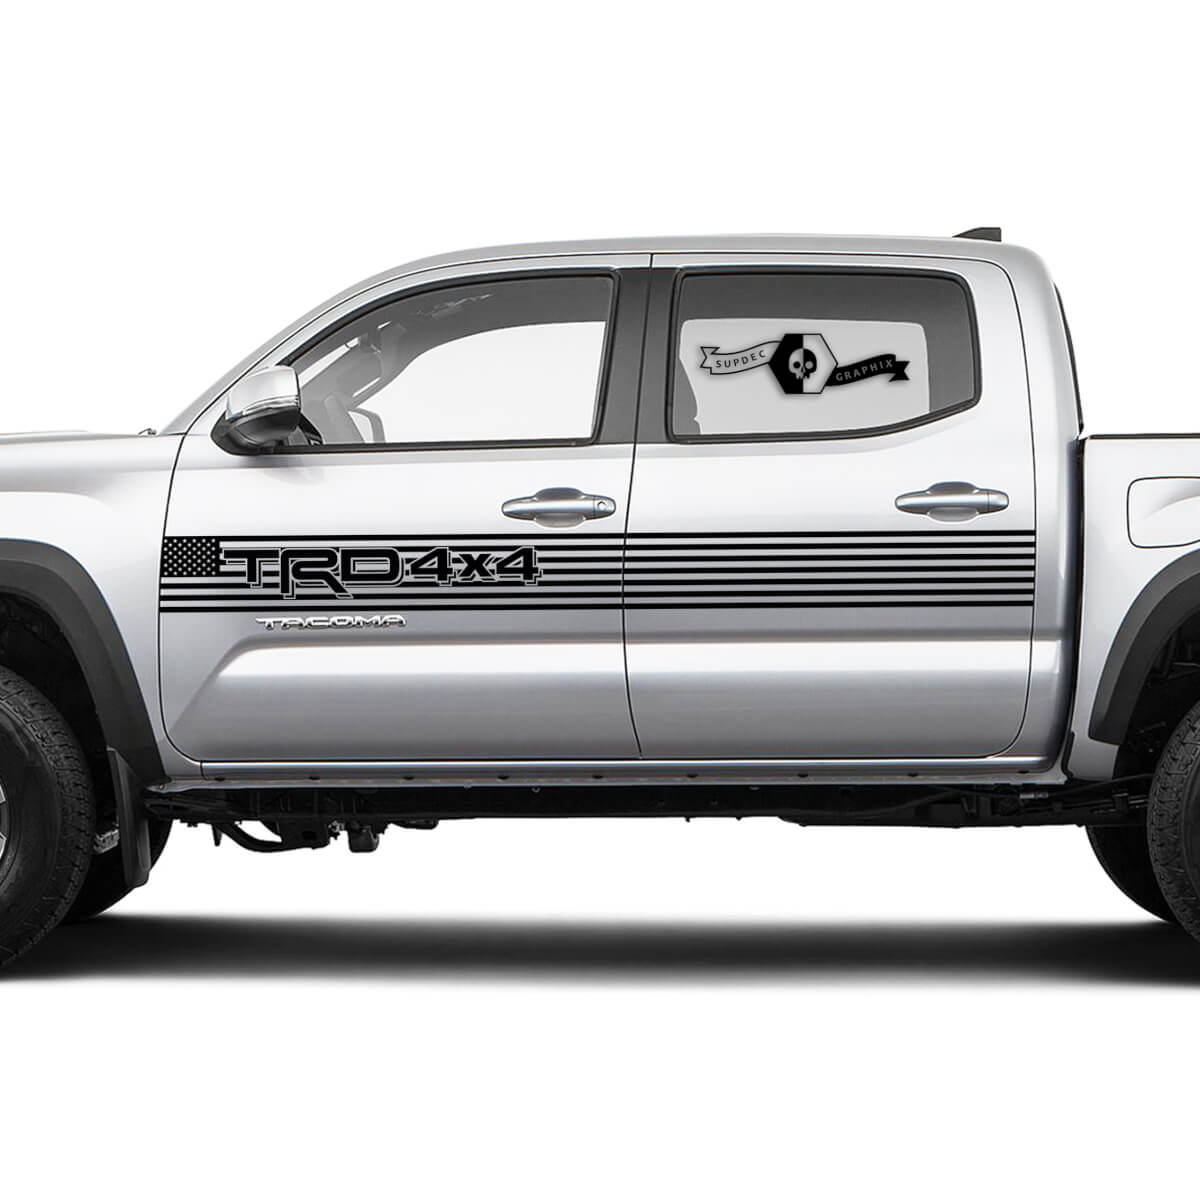 TRD Off Road TOYOTA USA Flag stripes Decals Stickers for Tacoma Tundra 4Runner Hilux Doors